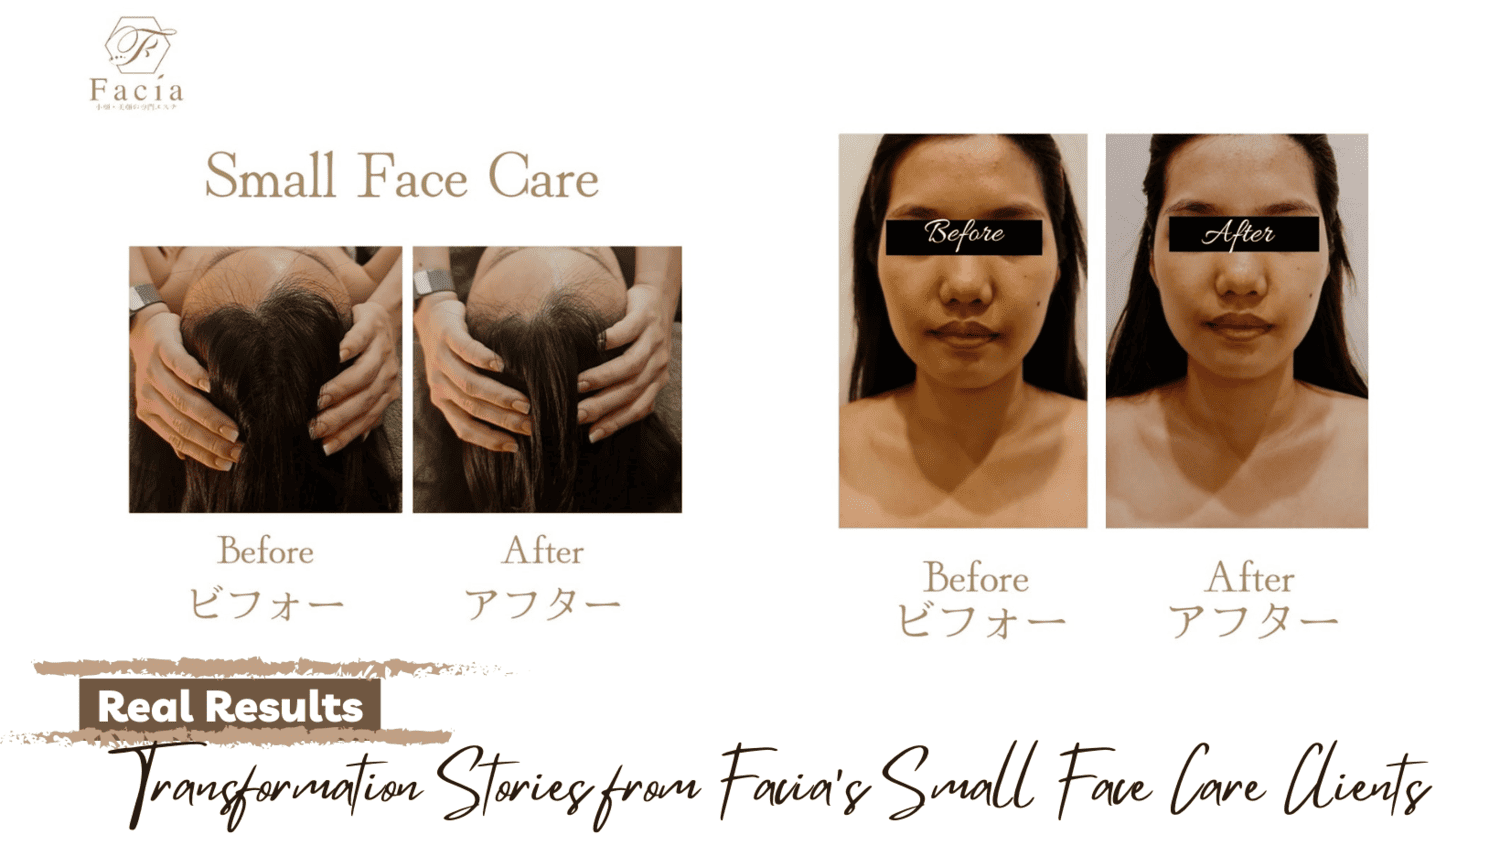 Real Results: Transformation Stories from Facia’s Small Face Care Clients